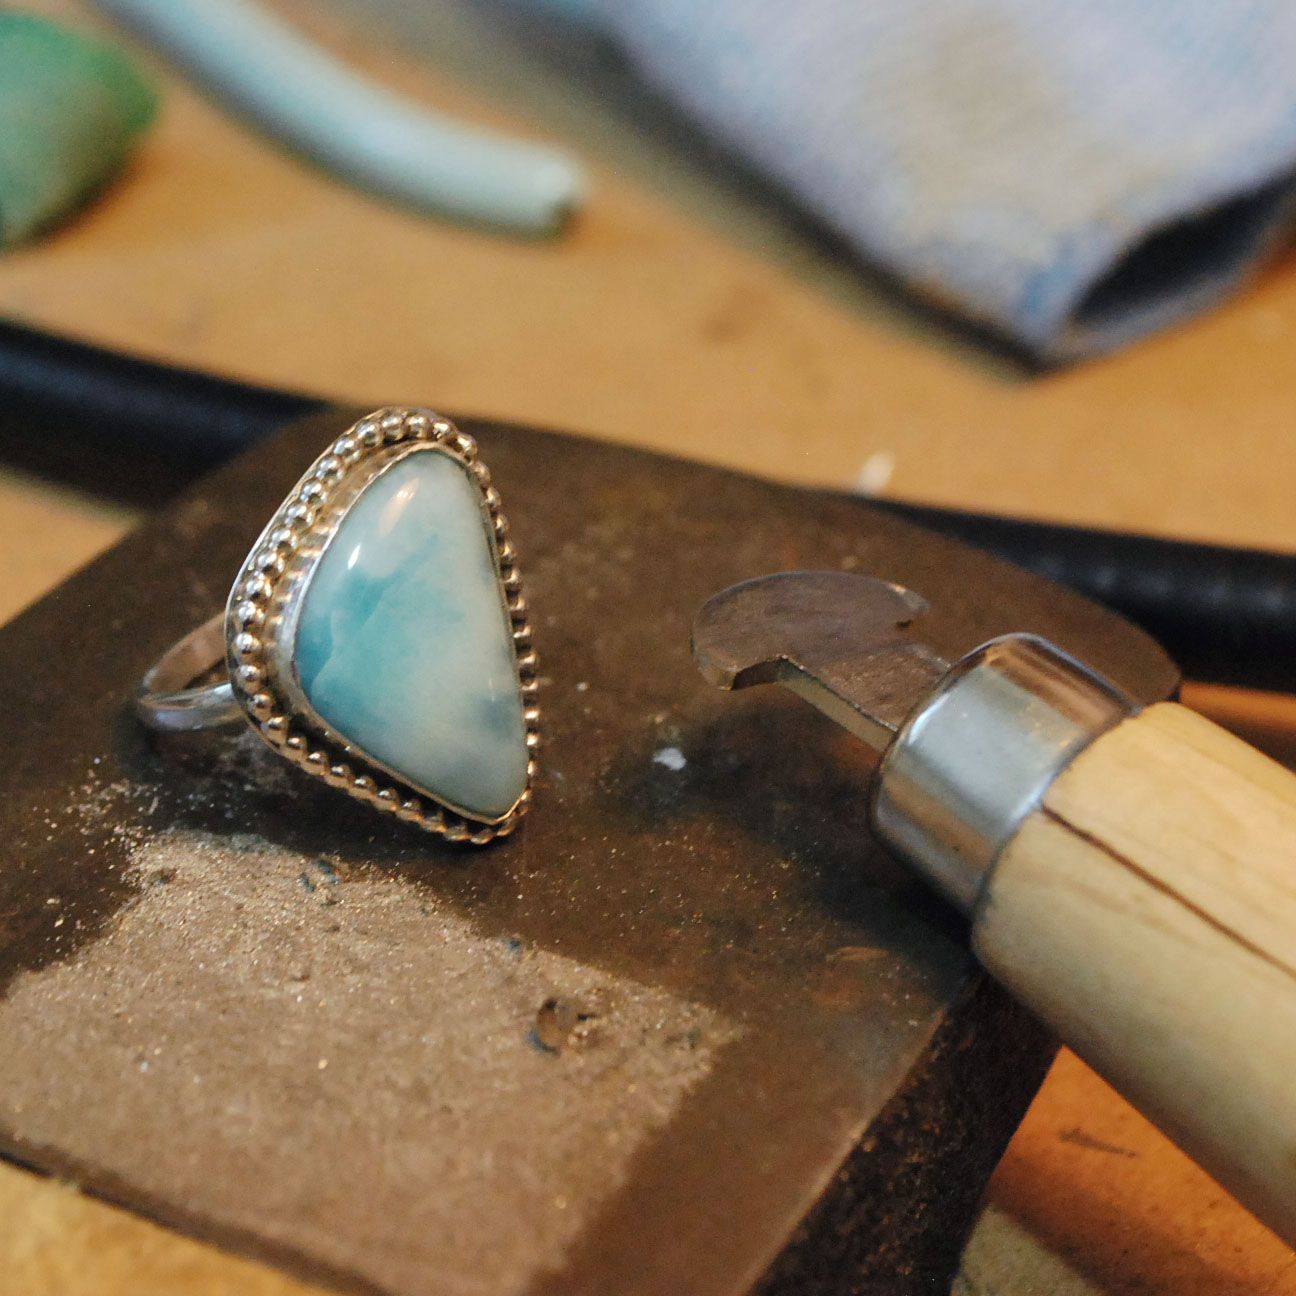 Learn from #Beebeecraft how to make simple but #elegant #stone #ring